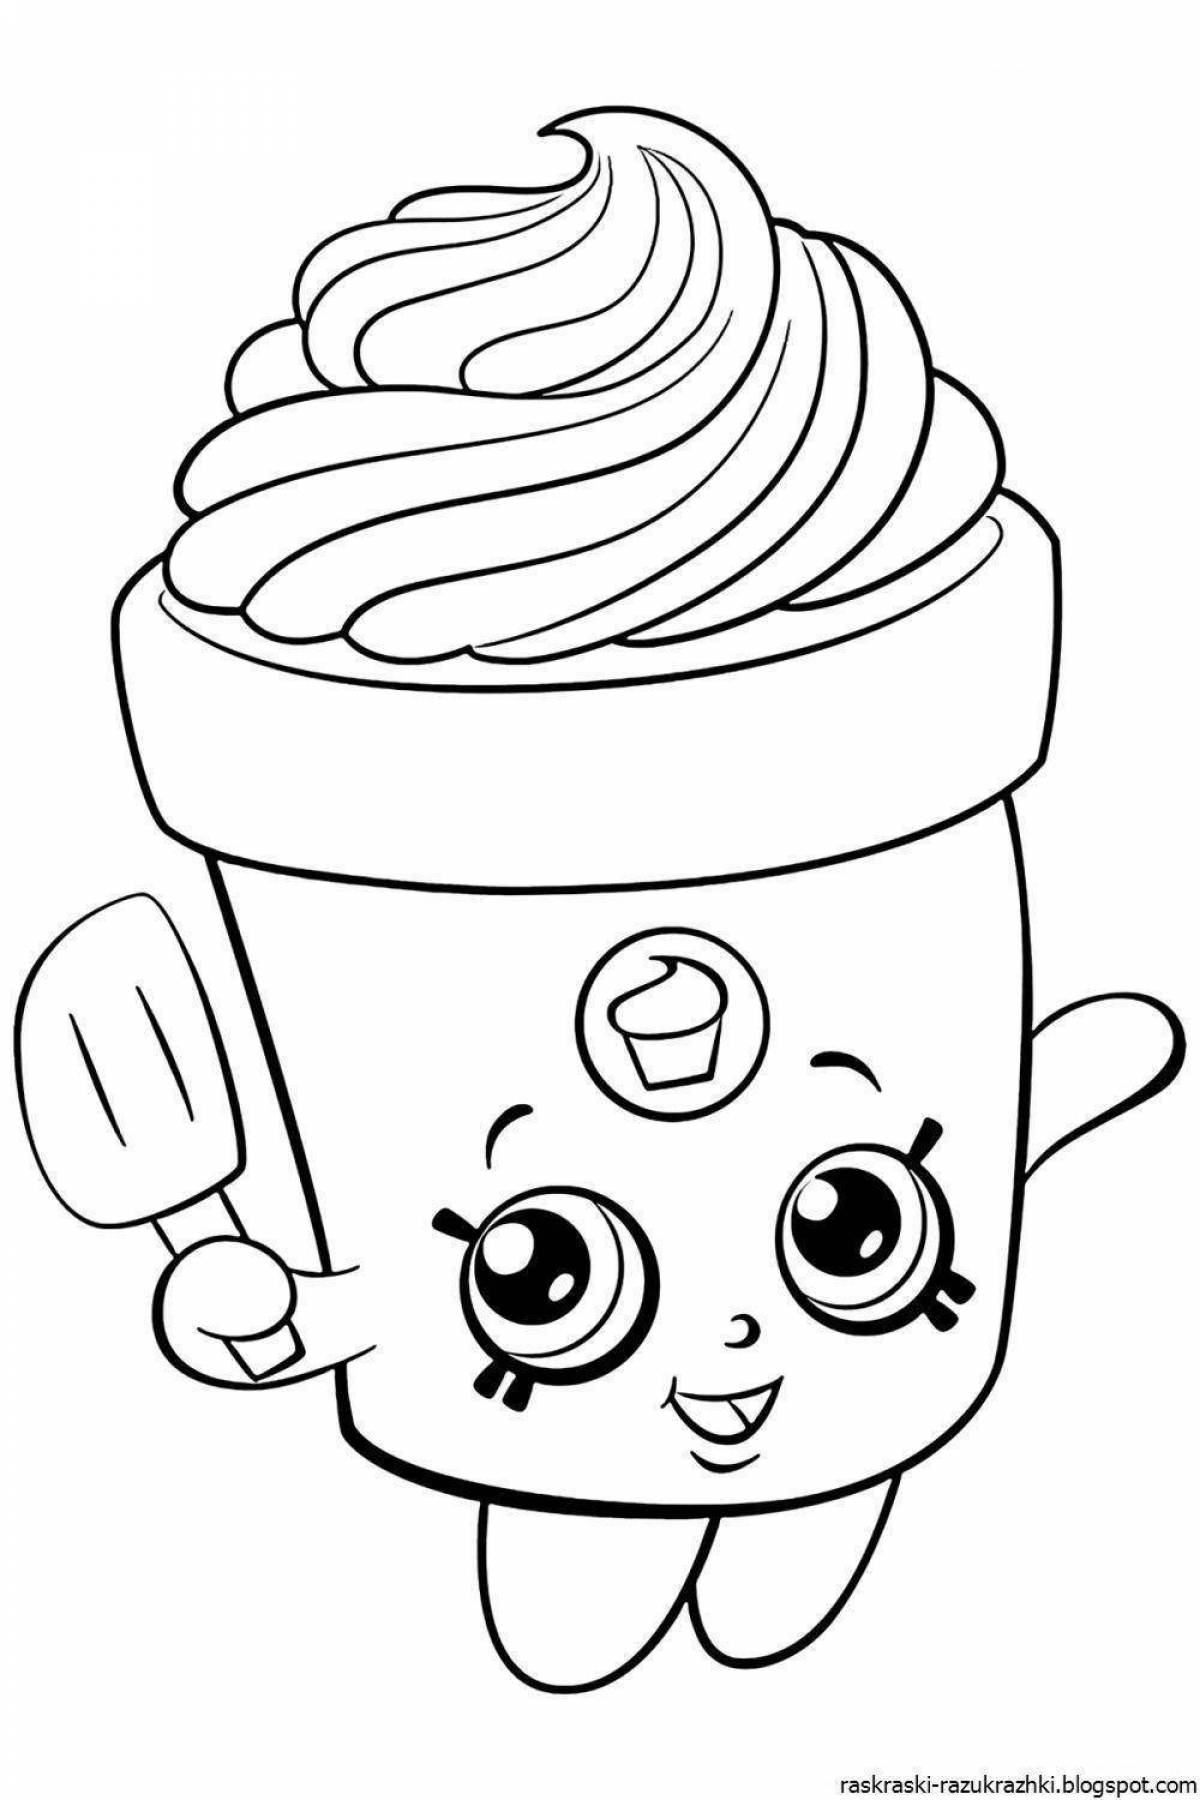 Shopkins coloring pages for kids